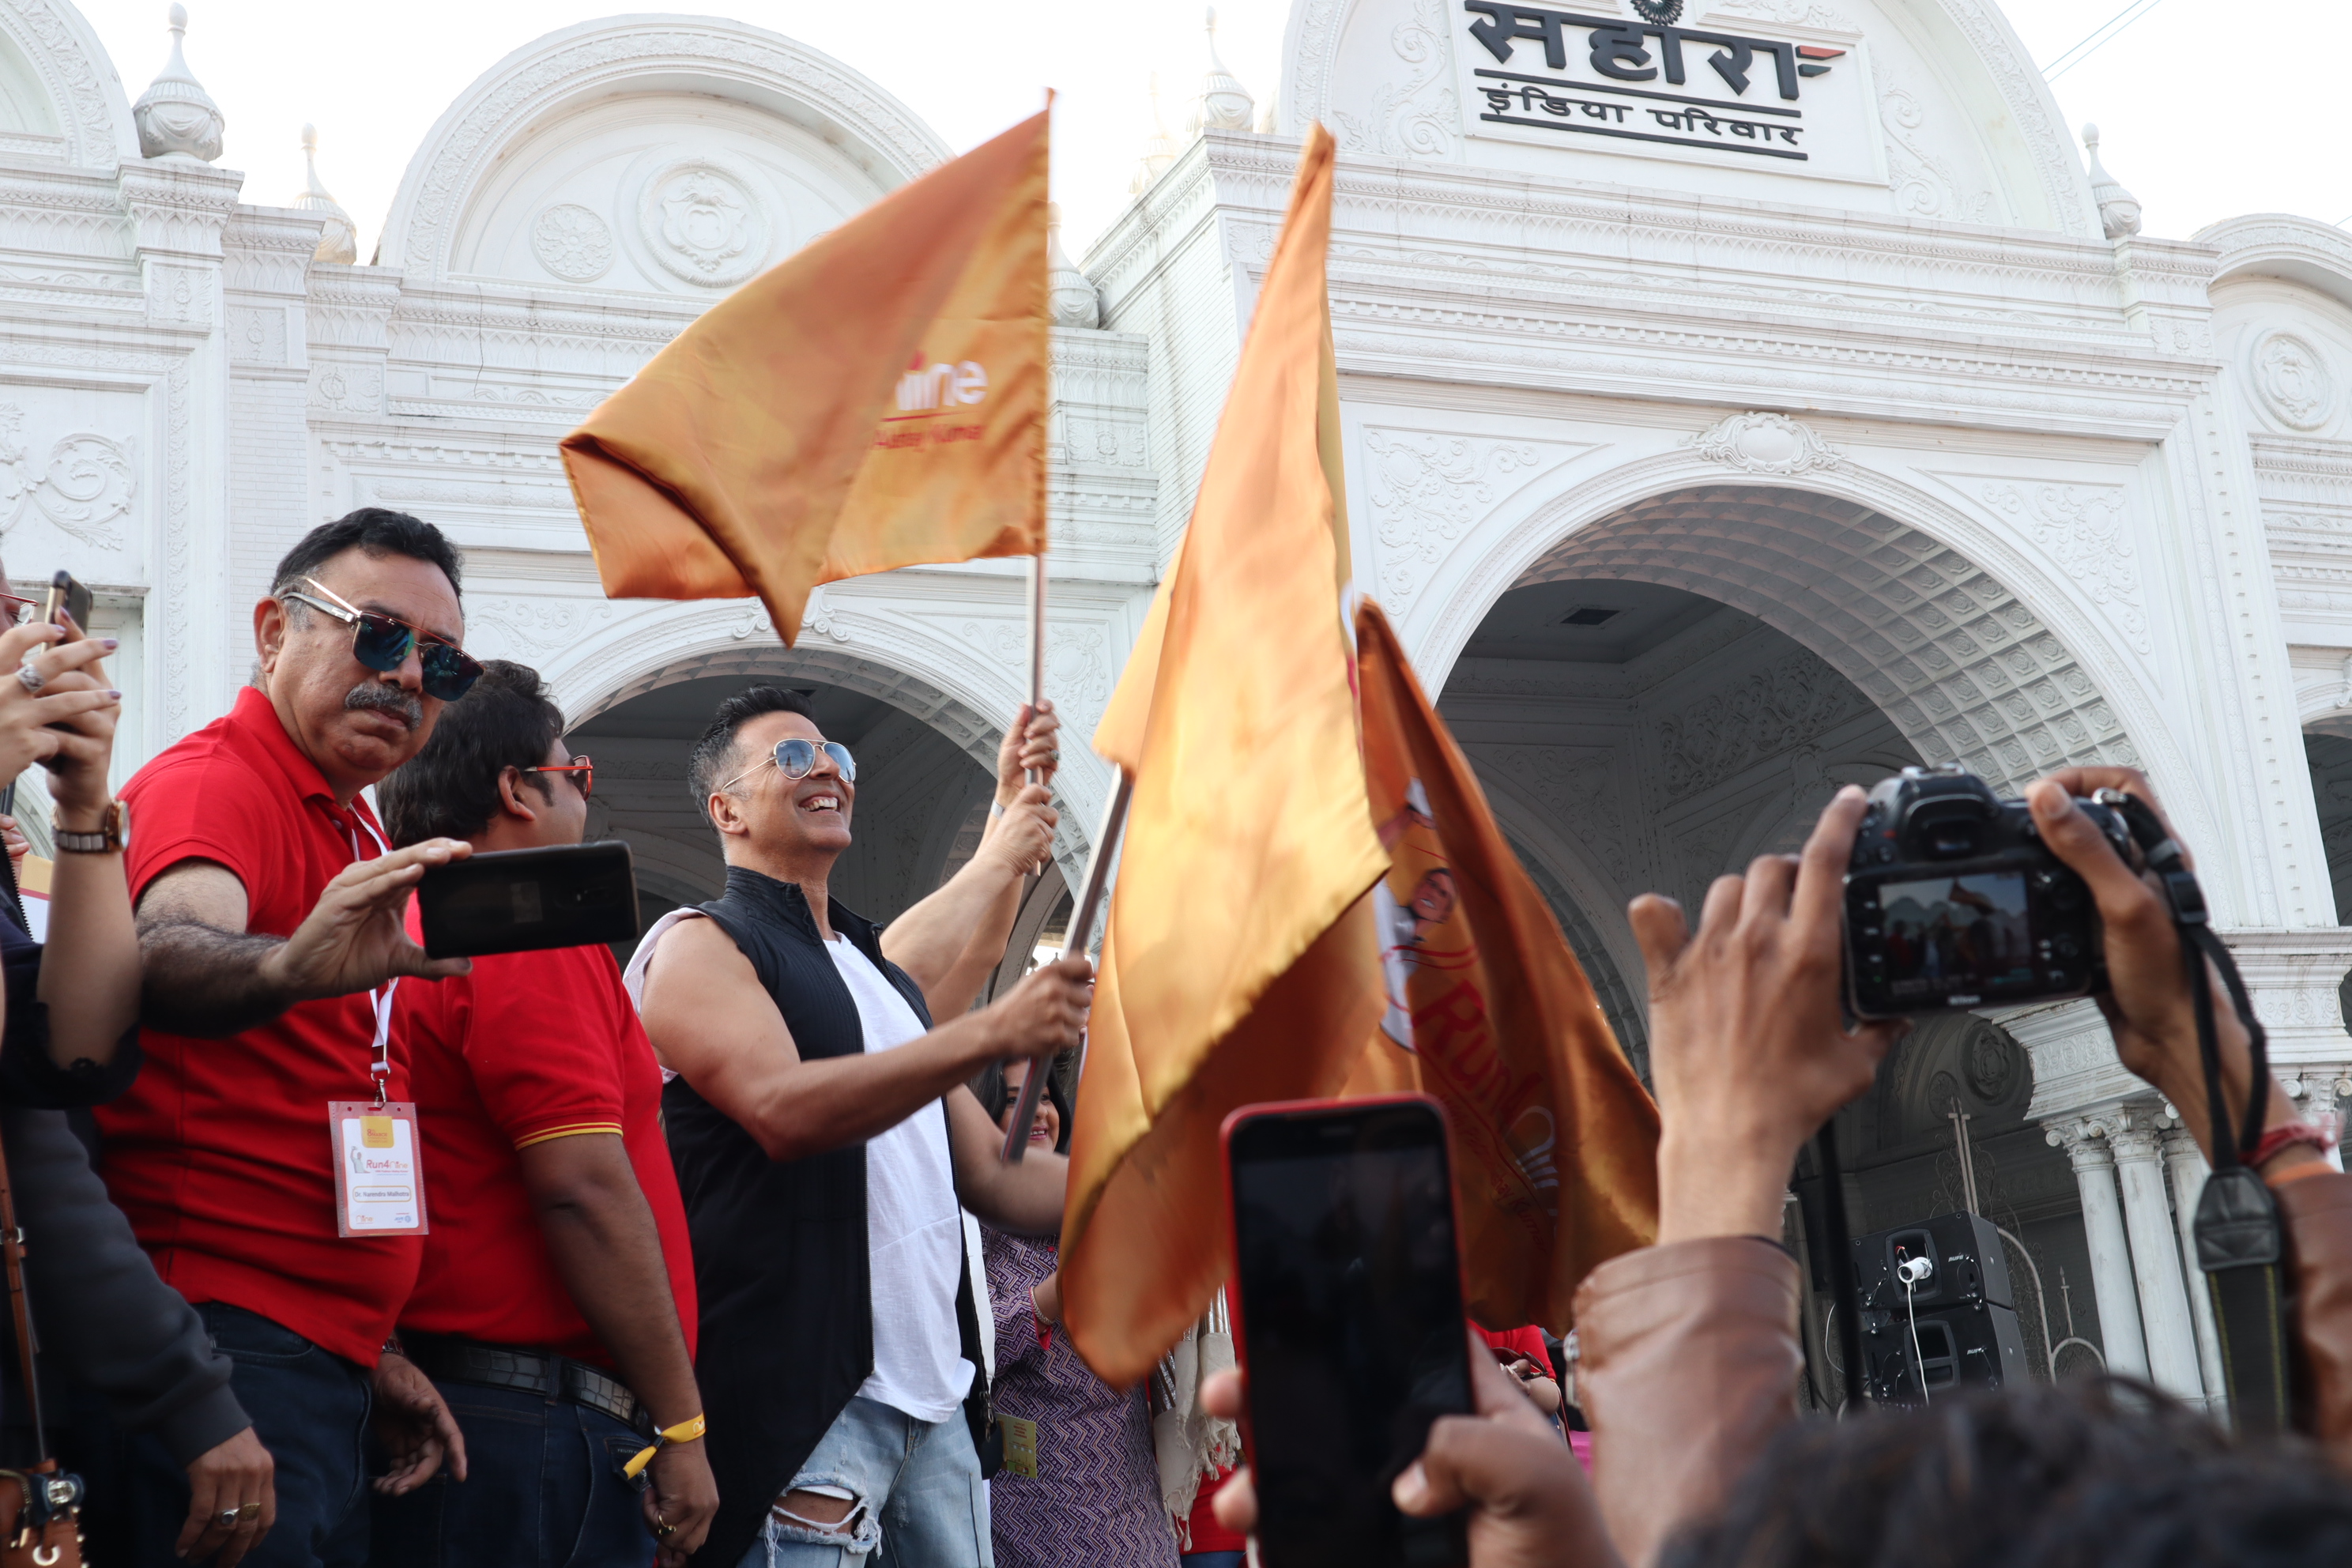 PAD MAN AKSHAY KUMAR FLAGS OFF INDIA’S LARGEST NATIONWIDE RUN IN LUCKNOW